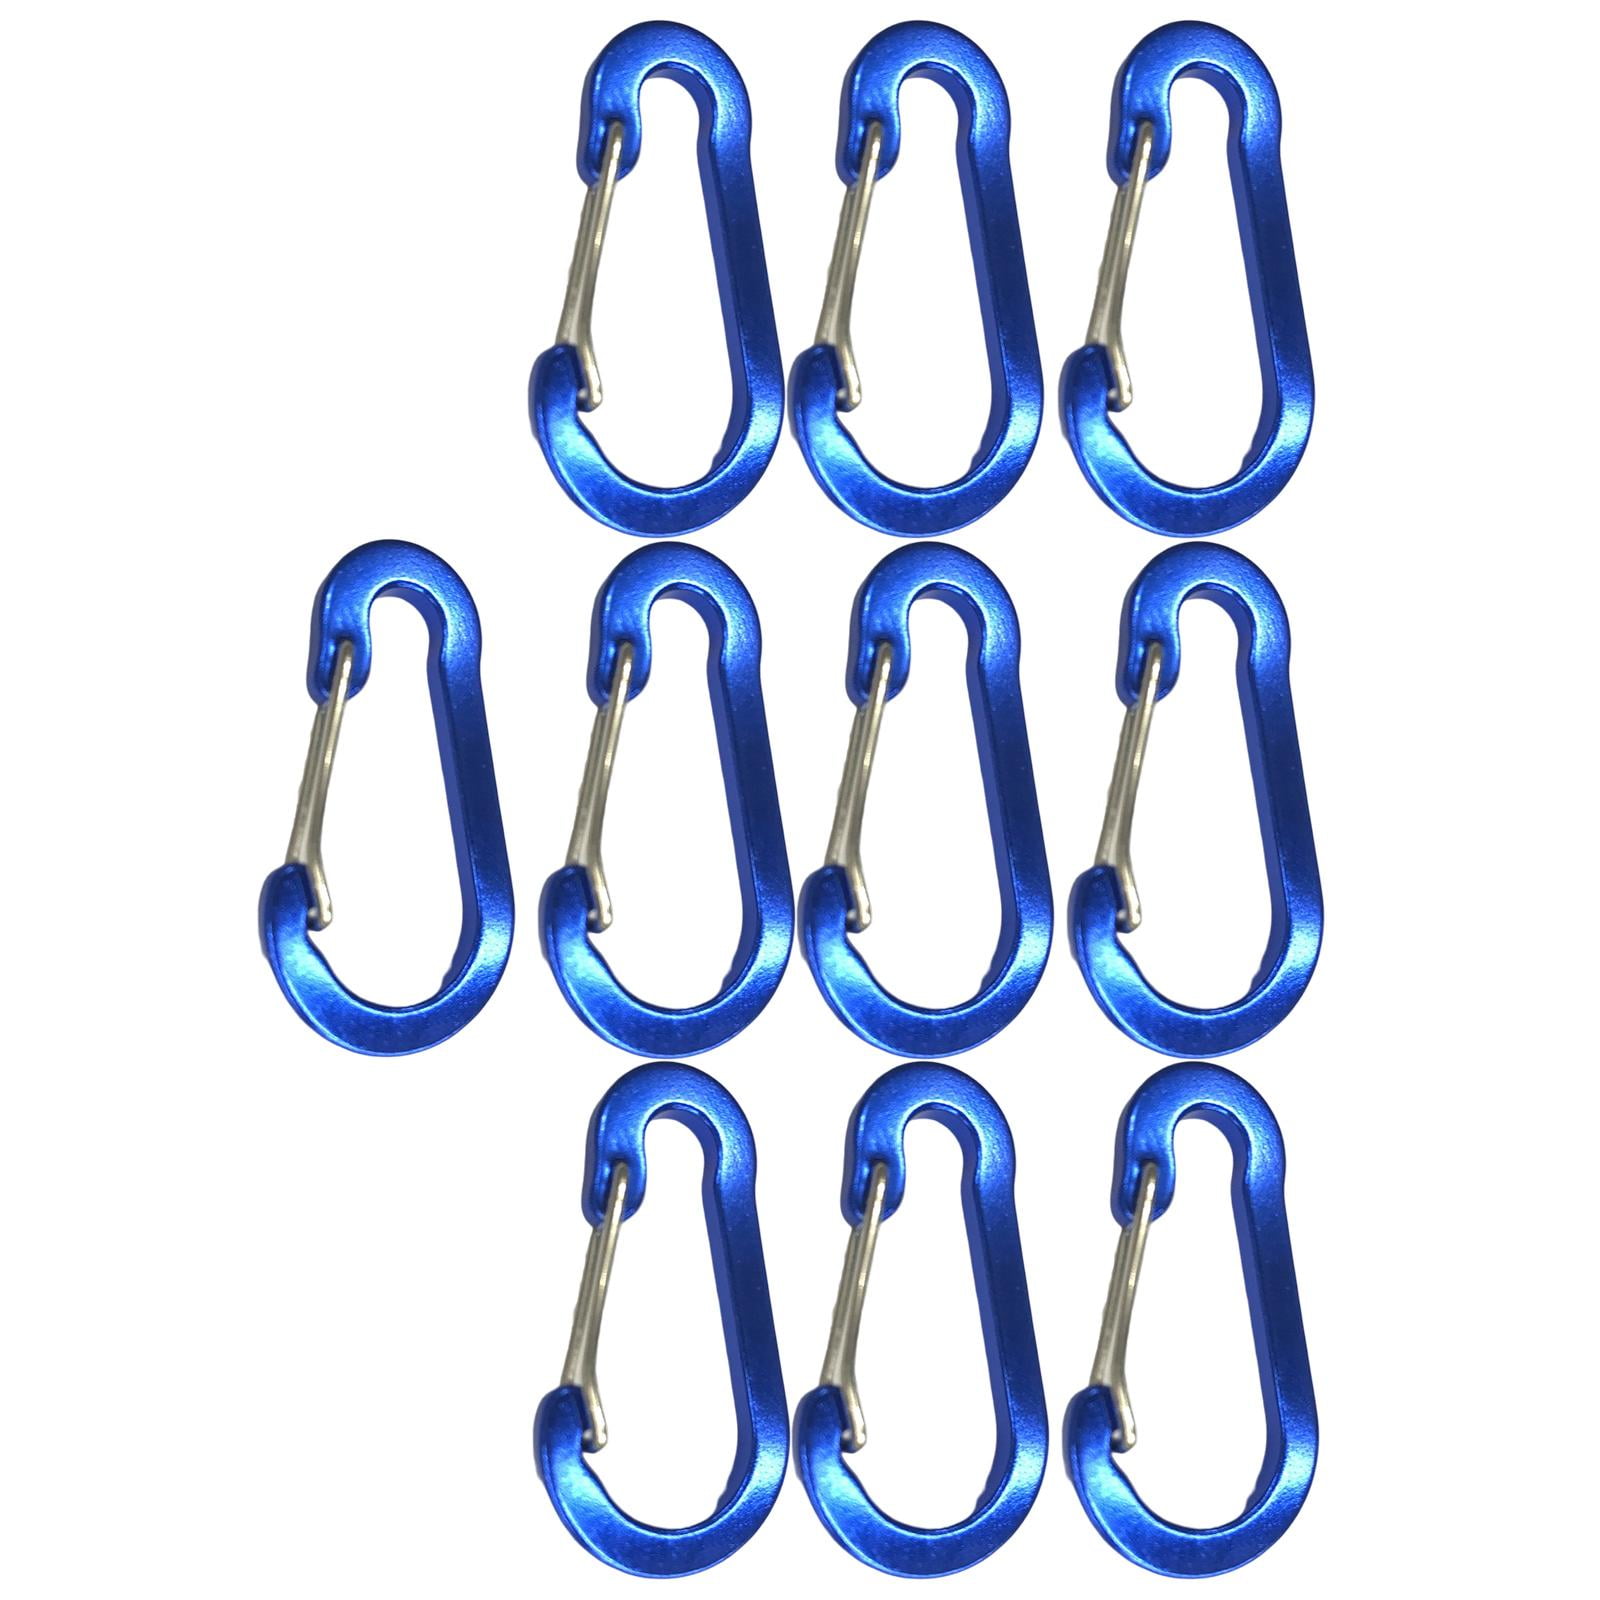 10 Pack Aluminum D s Hiking Clips Locking Carabiner for Hiking